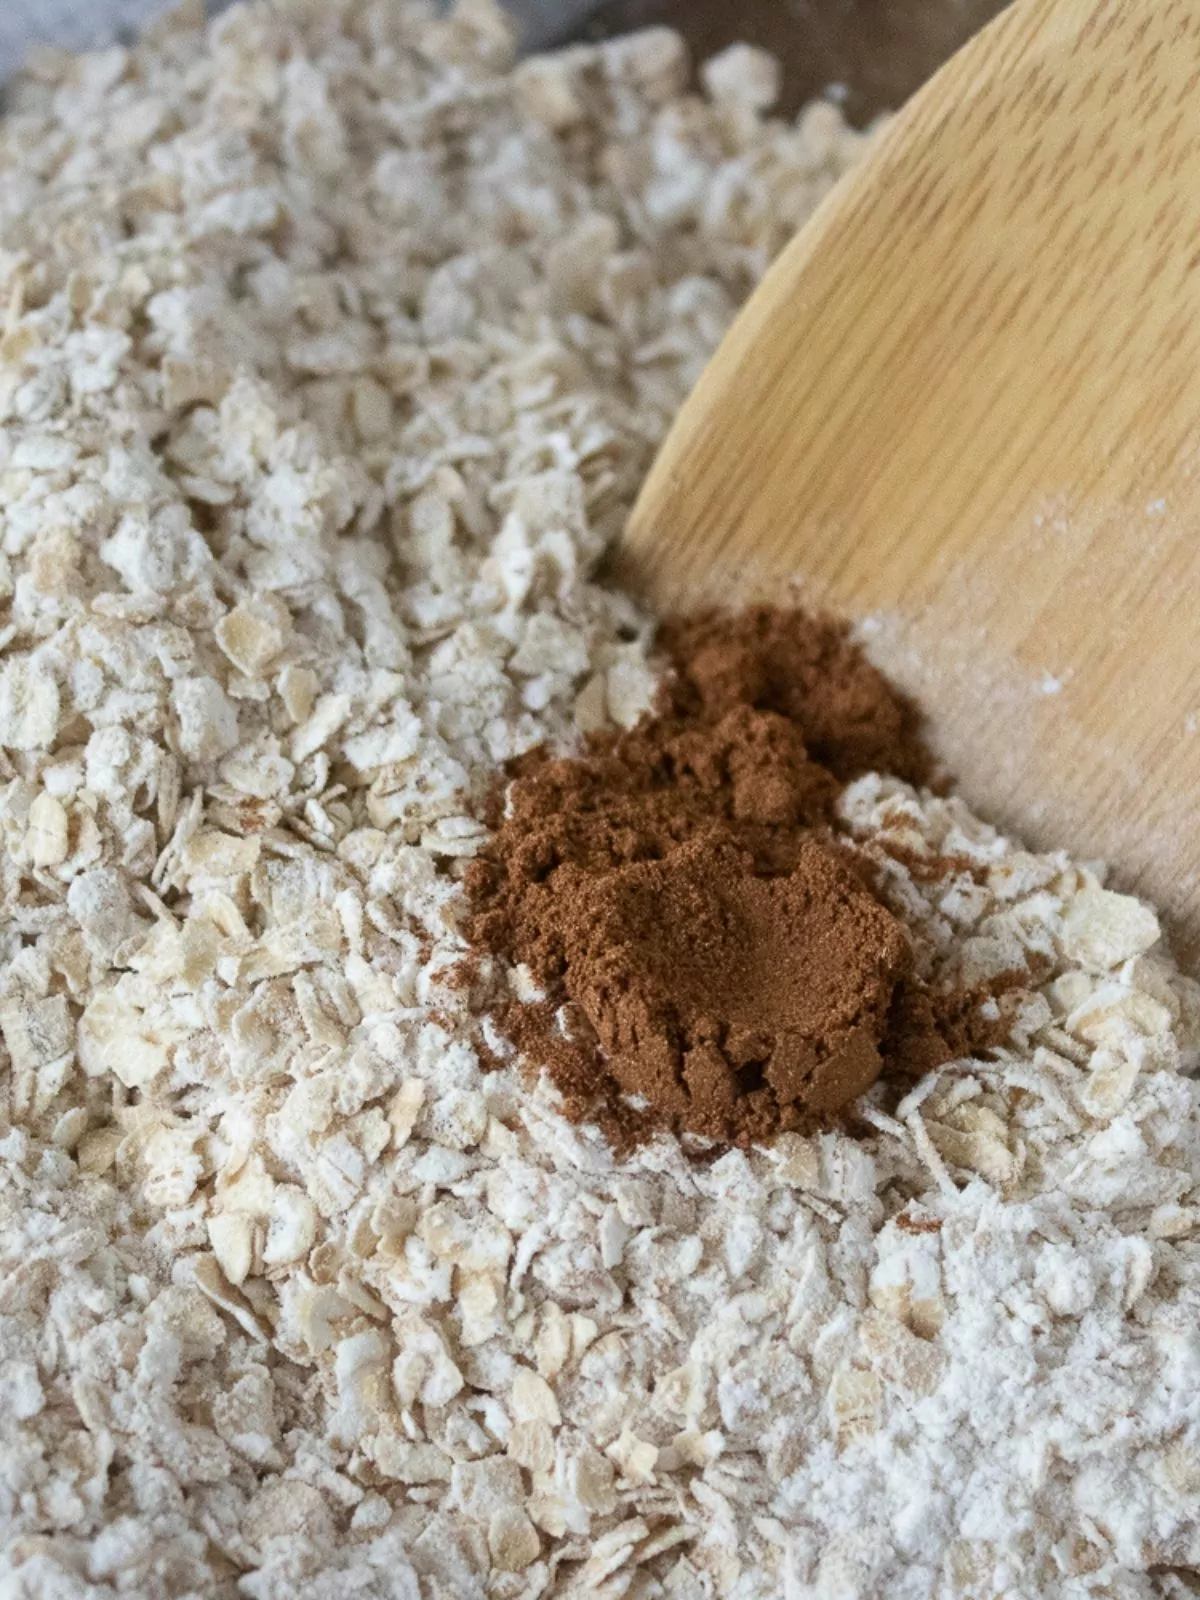 cinnamon with oats and flour mixture.